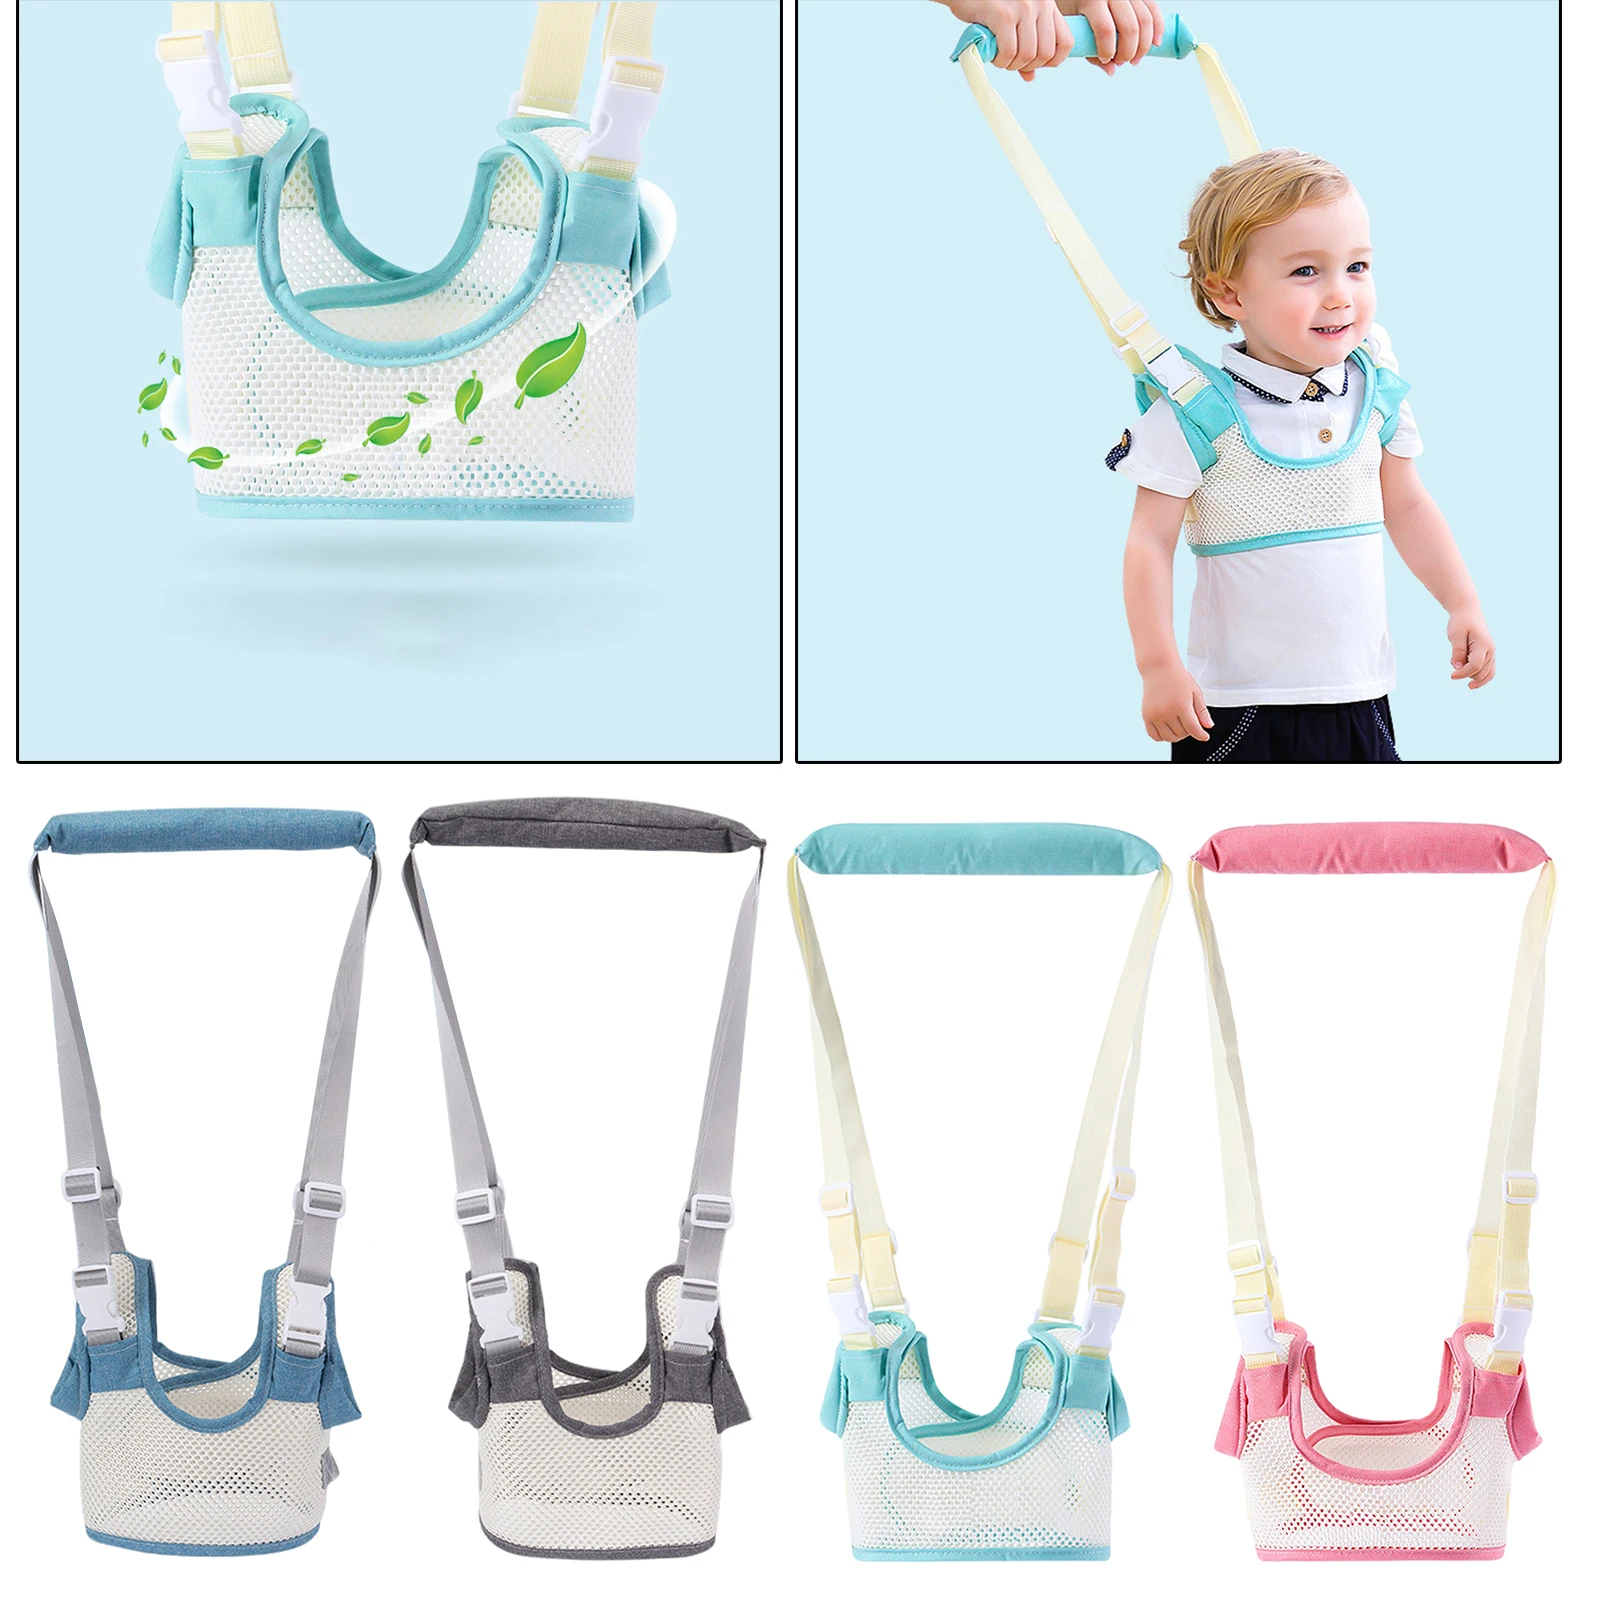 Kids Walking Harness, Learn to Walk Assistant, Handheld Baby Harness for Babies and Toddlers